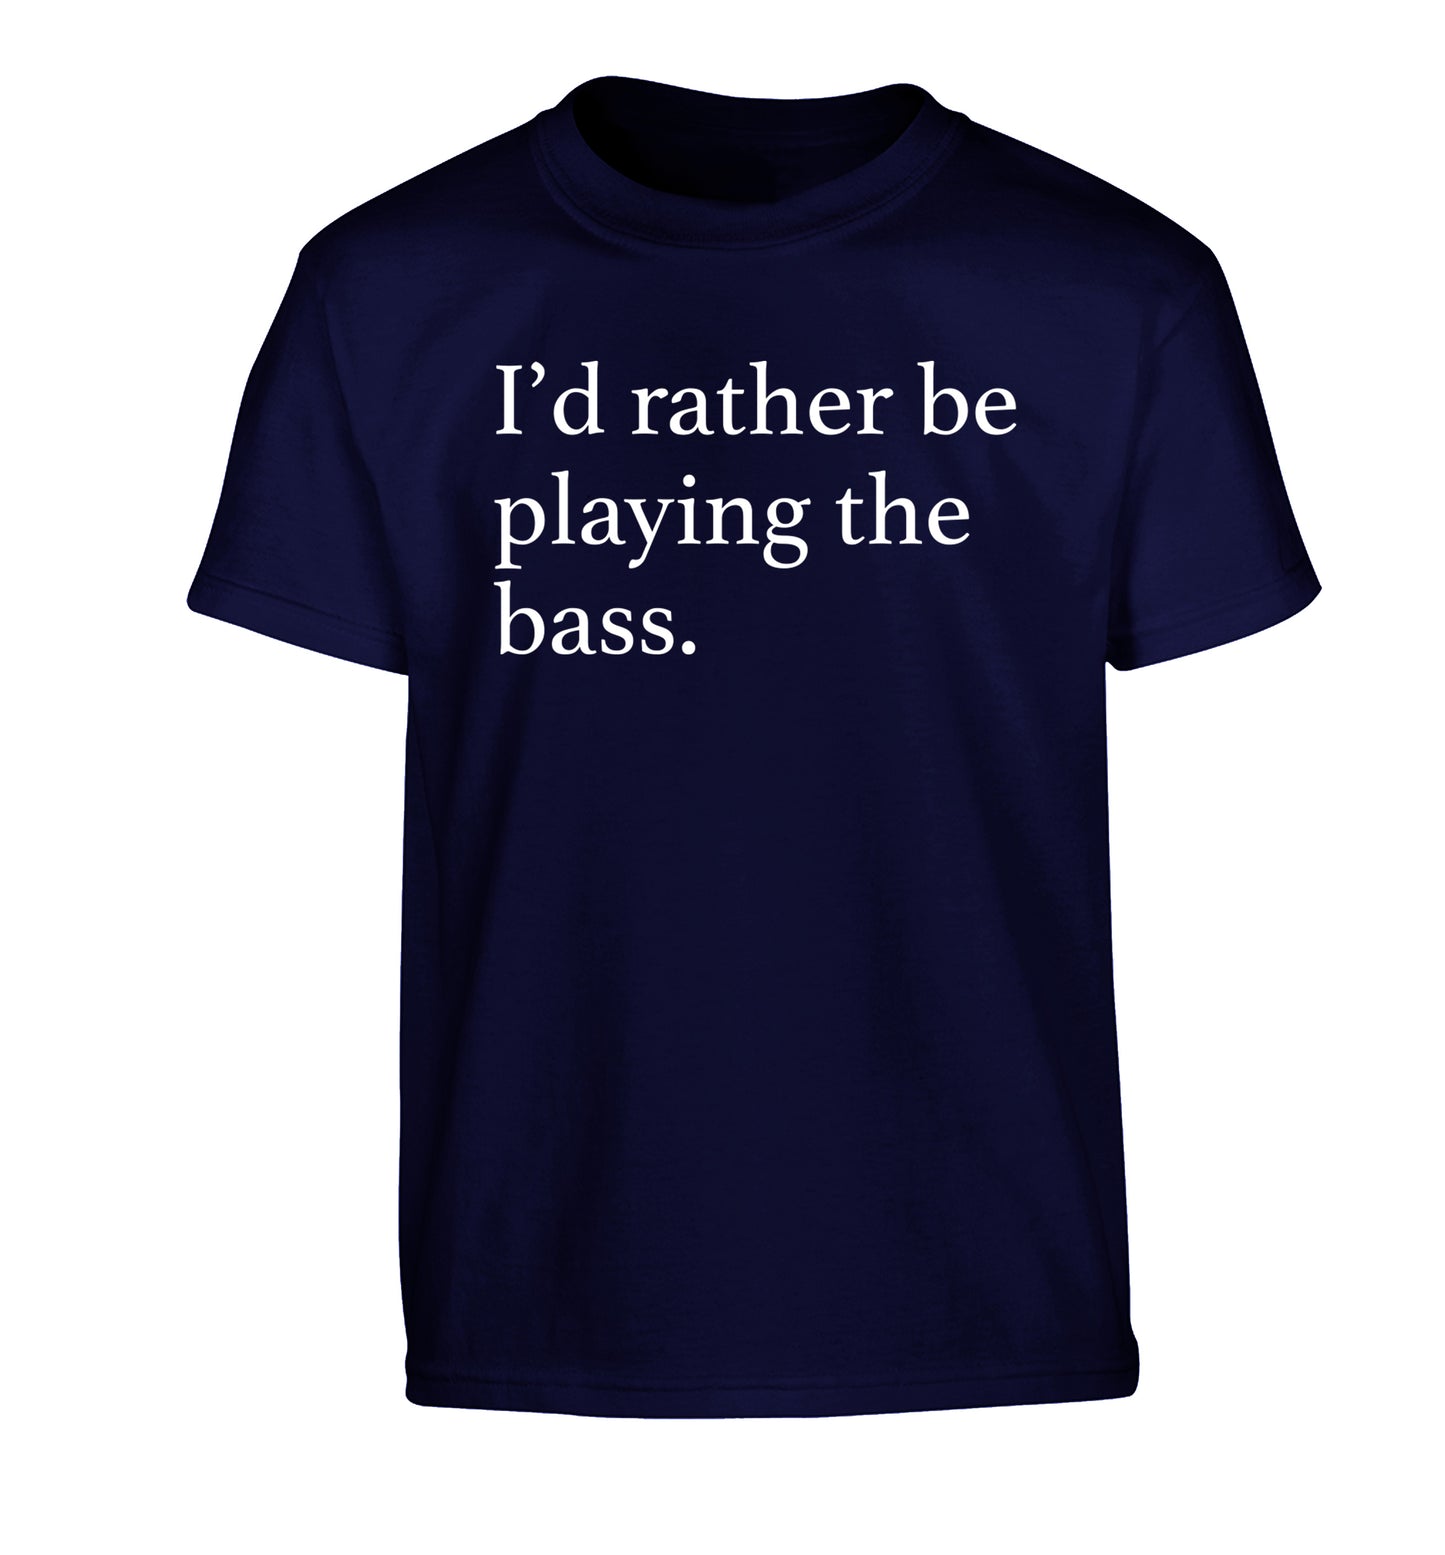 I'd rather by playing the bass Children's navy Tshirt 12-14 Years